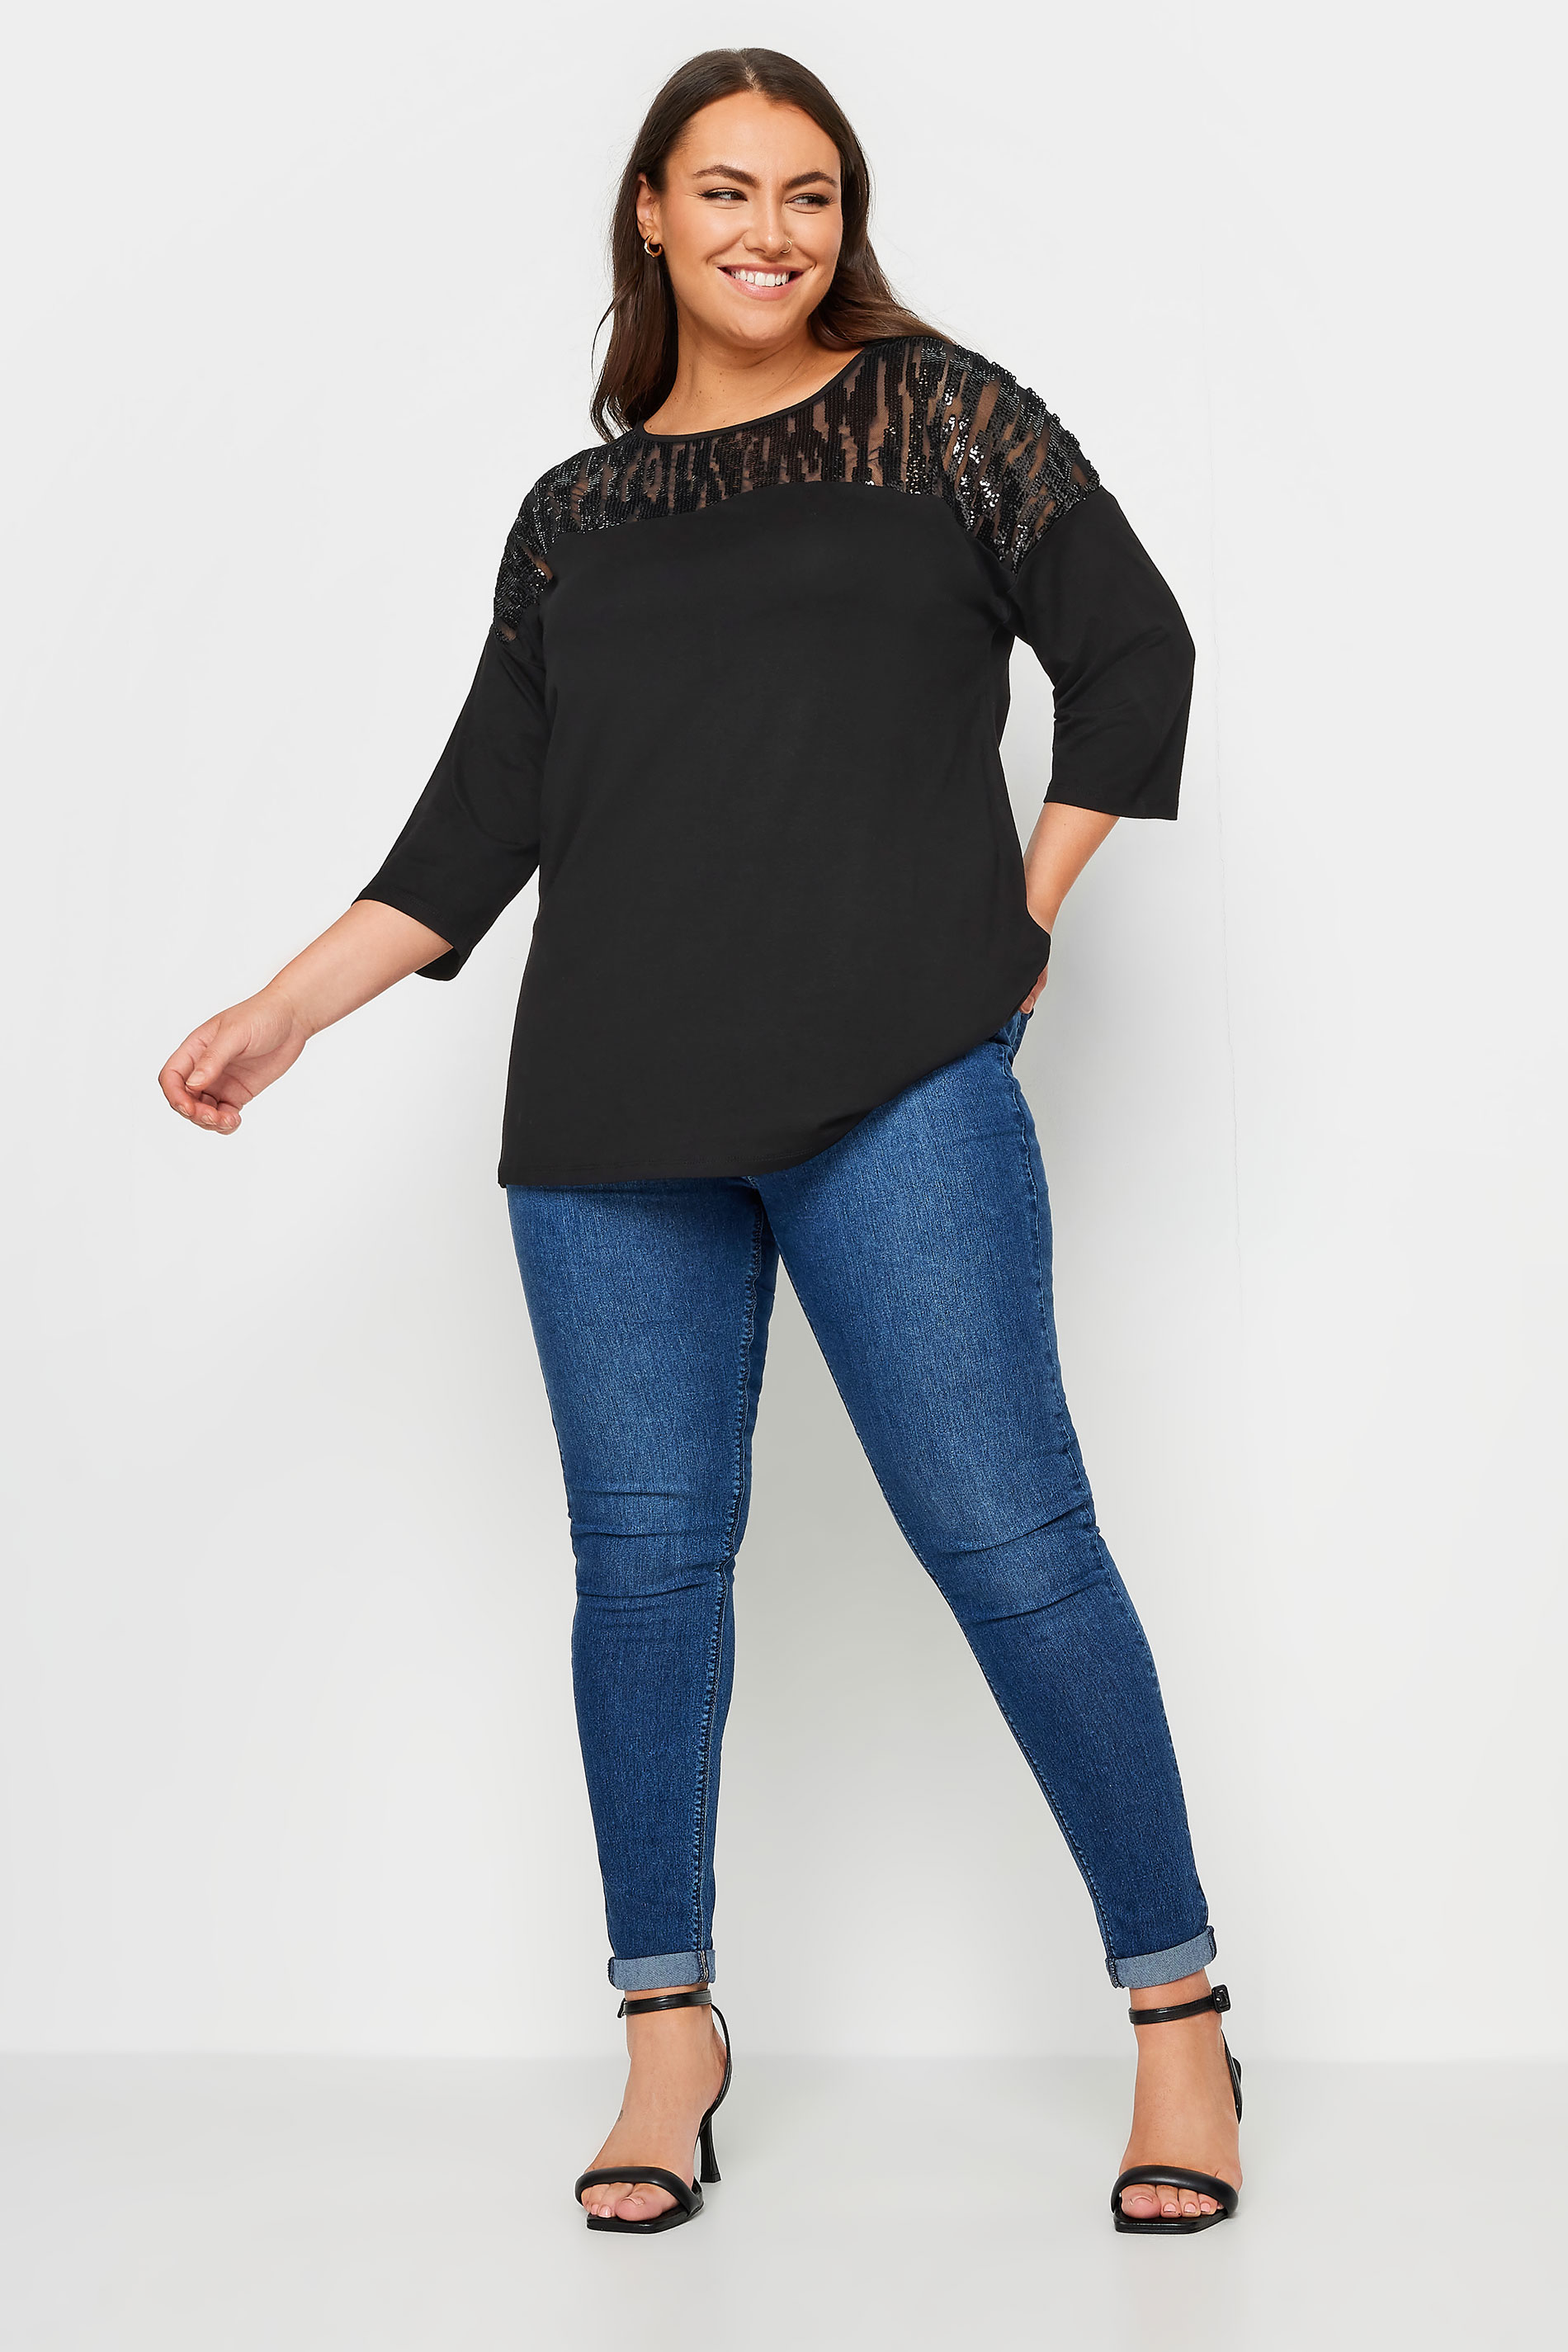 YOURS Plus Size Black Sequin Mesh Top | Yours Clothing 2